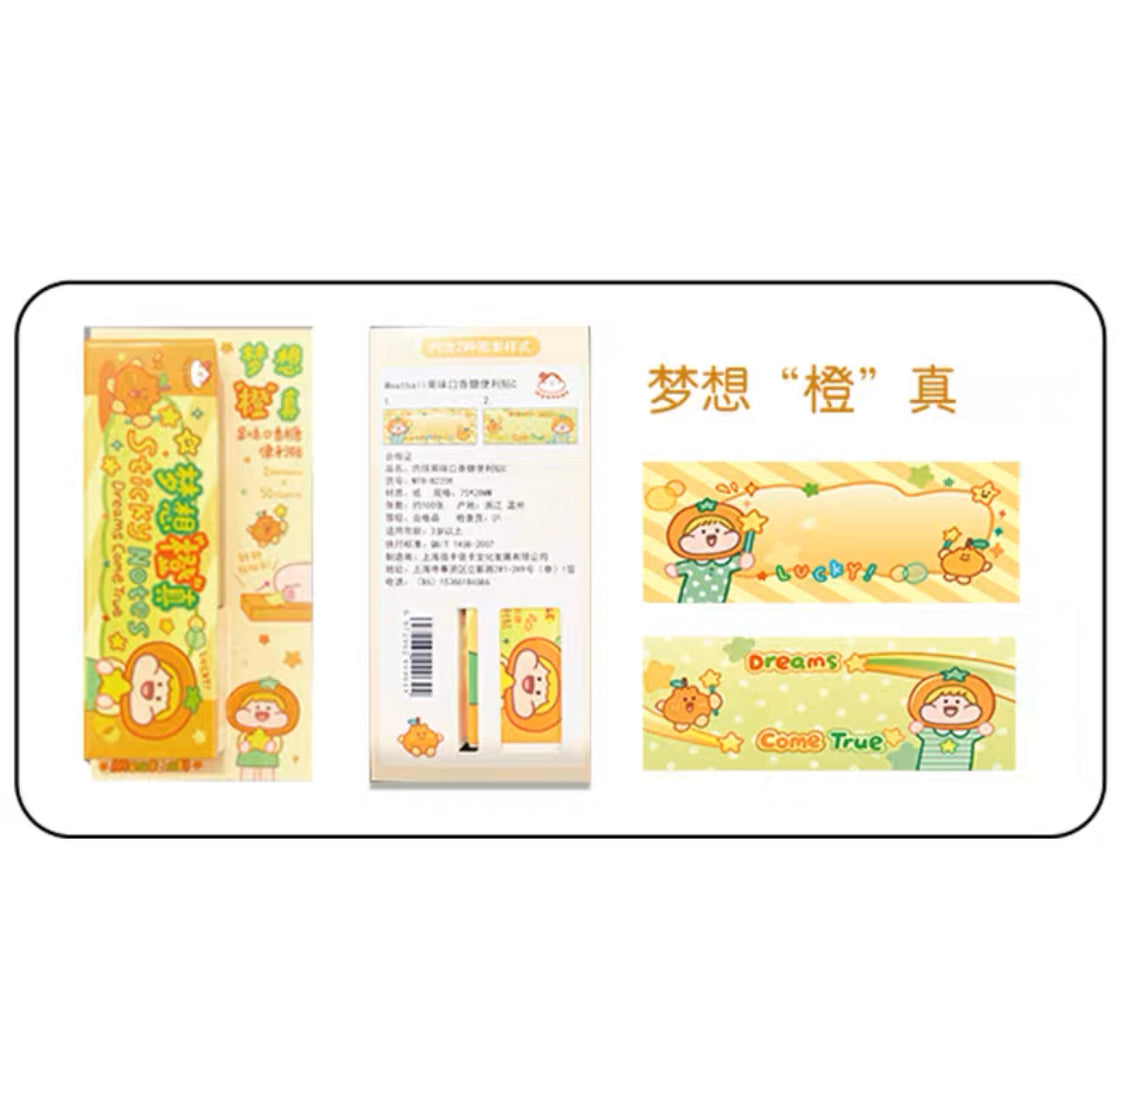 Meatball 「Fruit」series chewing size sticky note